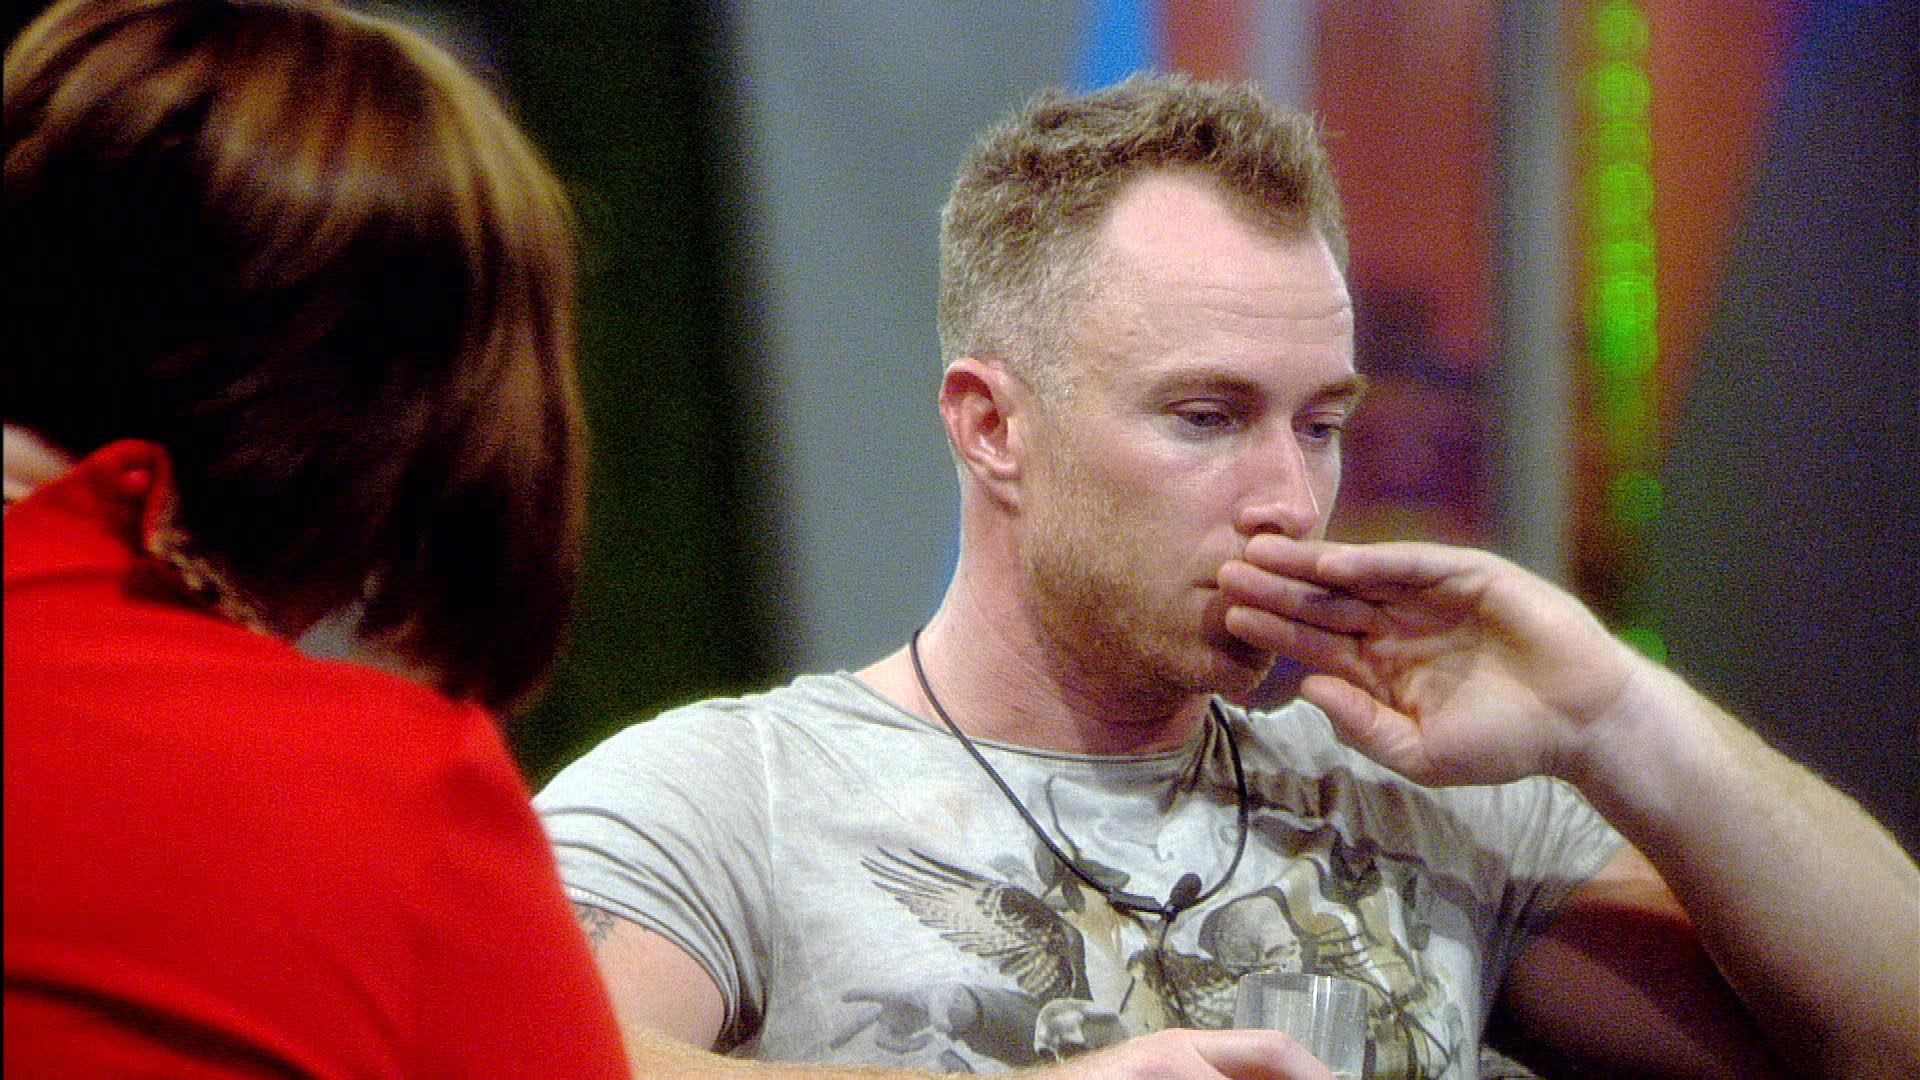 Day 25: Gary Busey and James Jordan clash over eviction comment